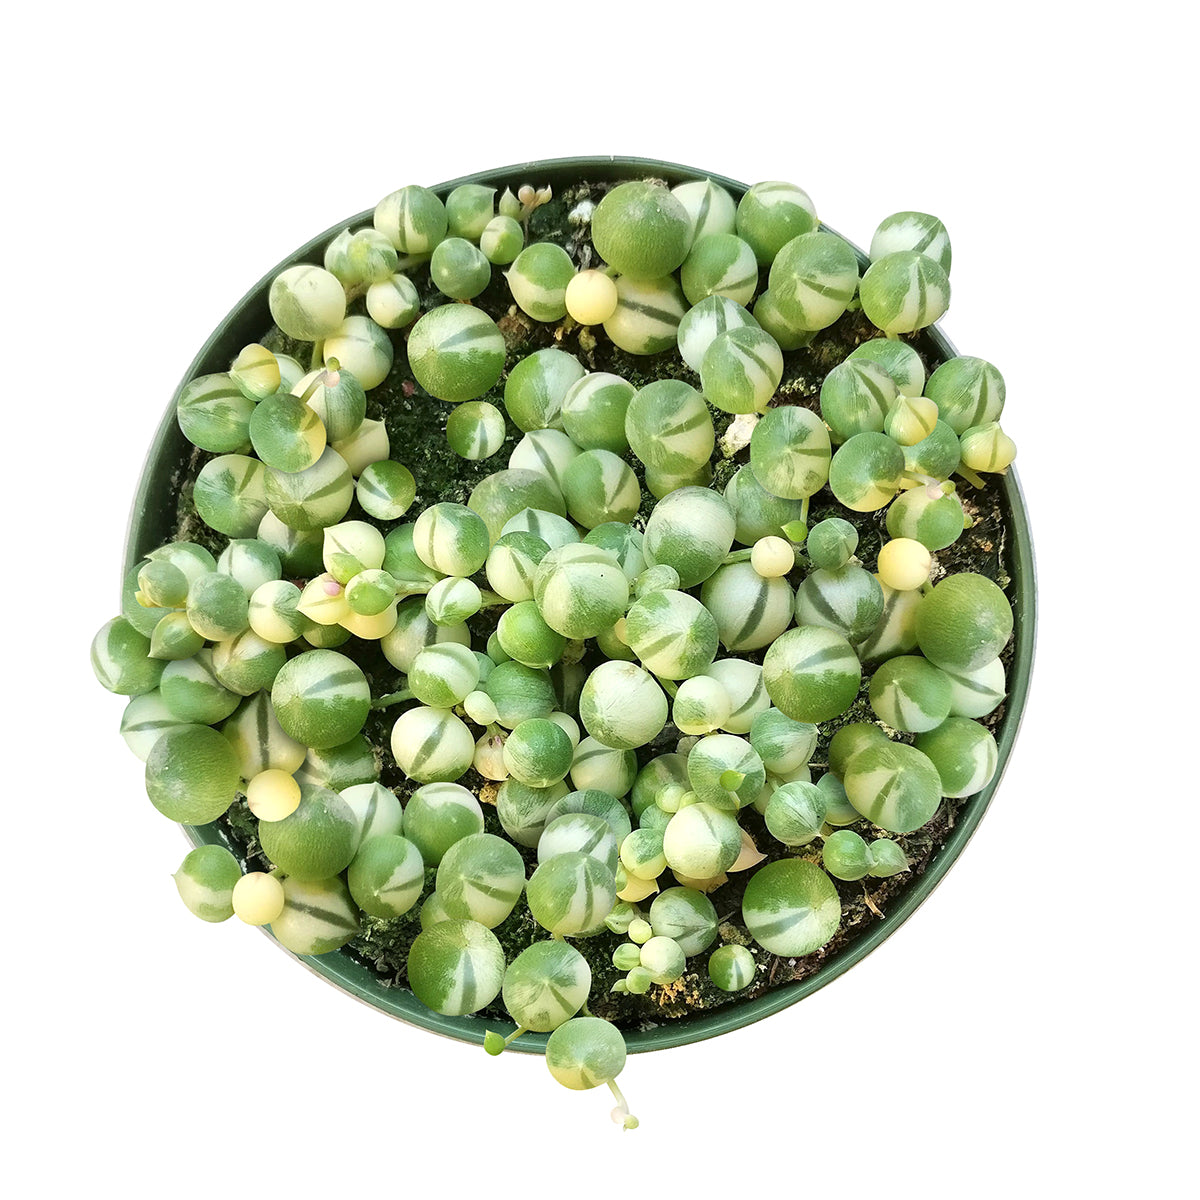 senecio string of pearls variegated succulent for sale, senecio rowleyanus, variegated string of pearls care, buy string of pearls variegated online, hanging/ trailing succulent plants, succulent hanging basket, succulent gift ideas, succulent gift delivery, succulent birthday gift